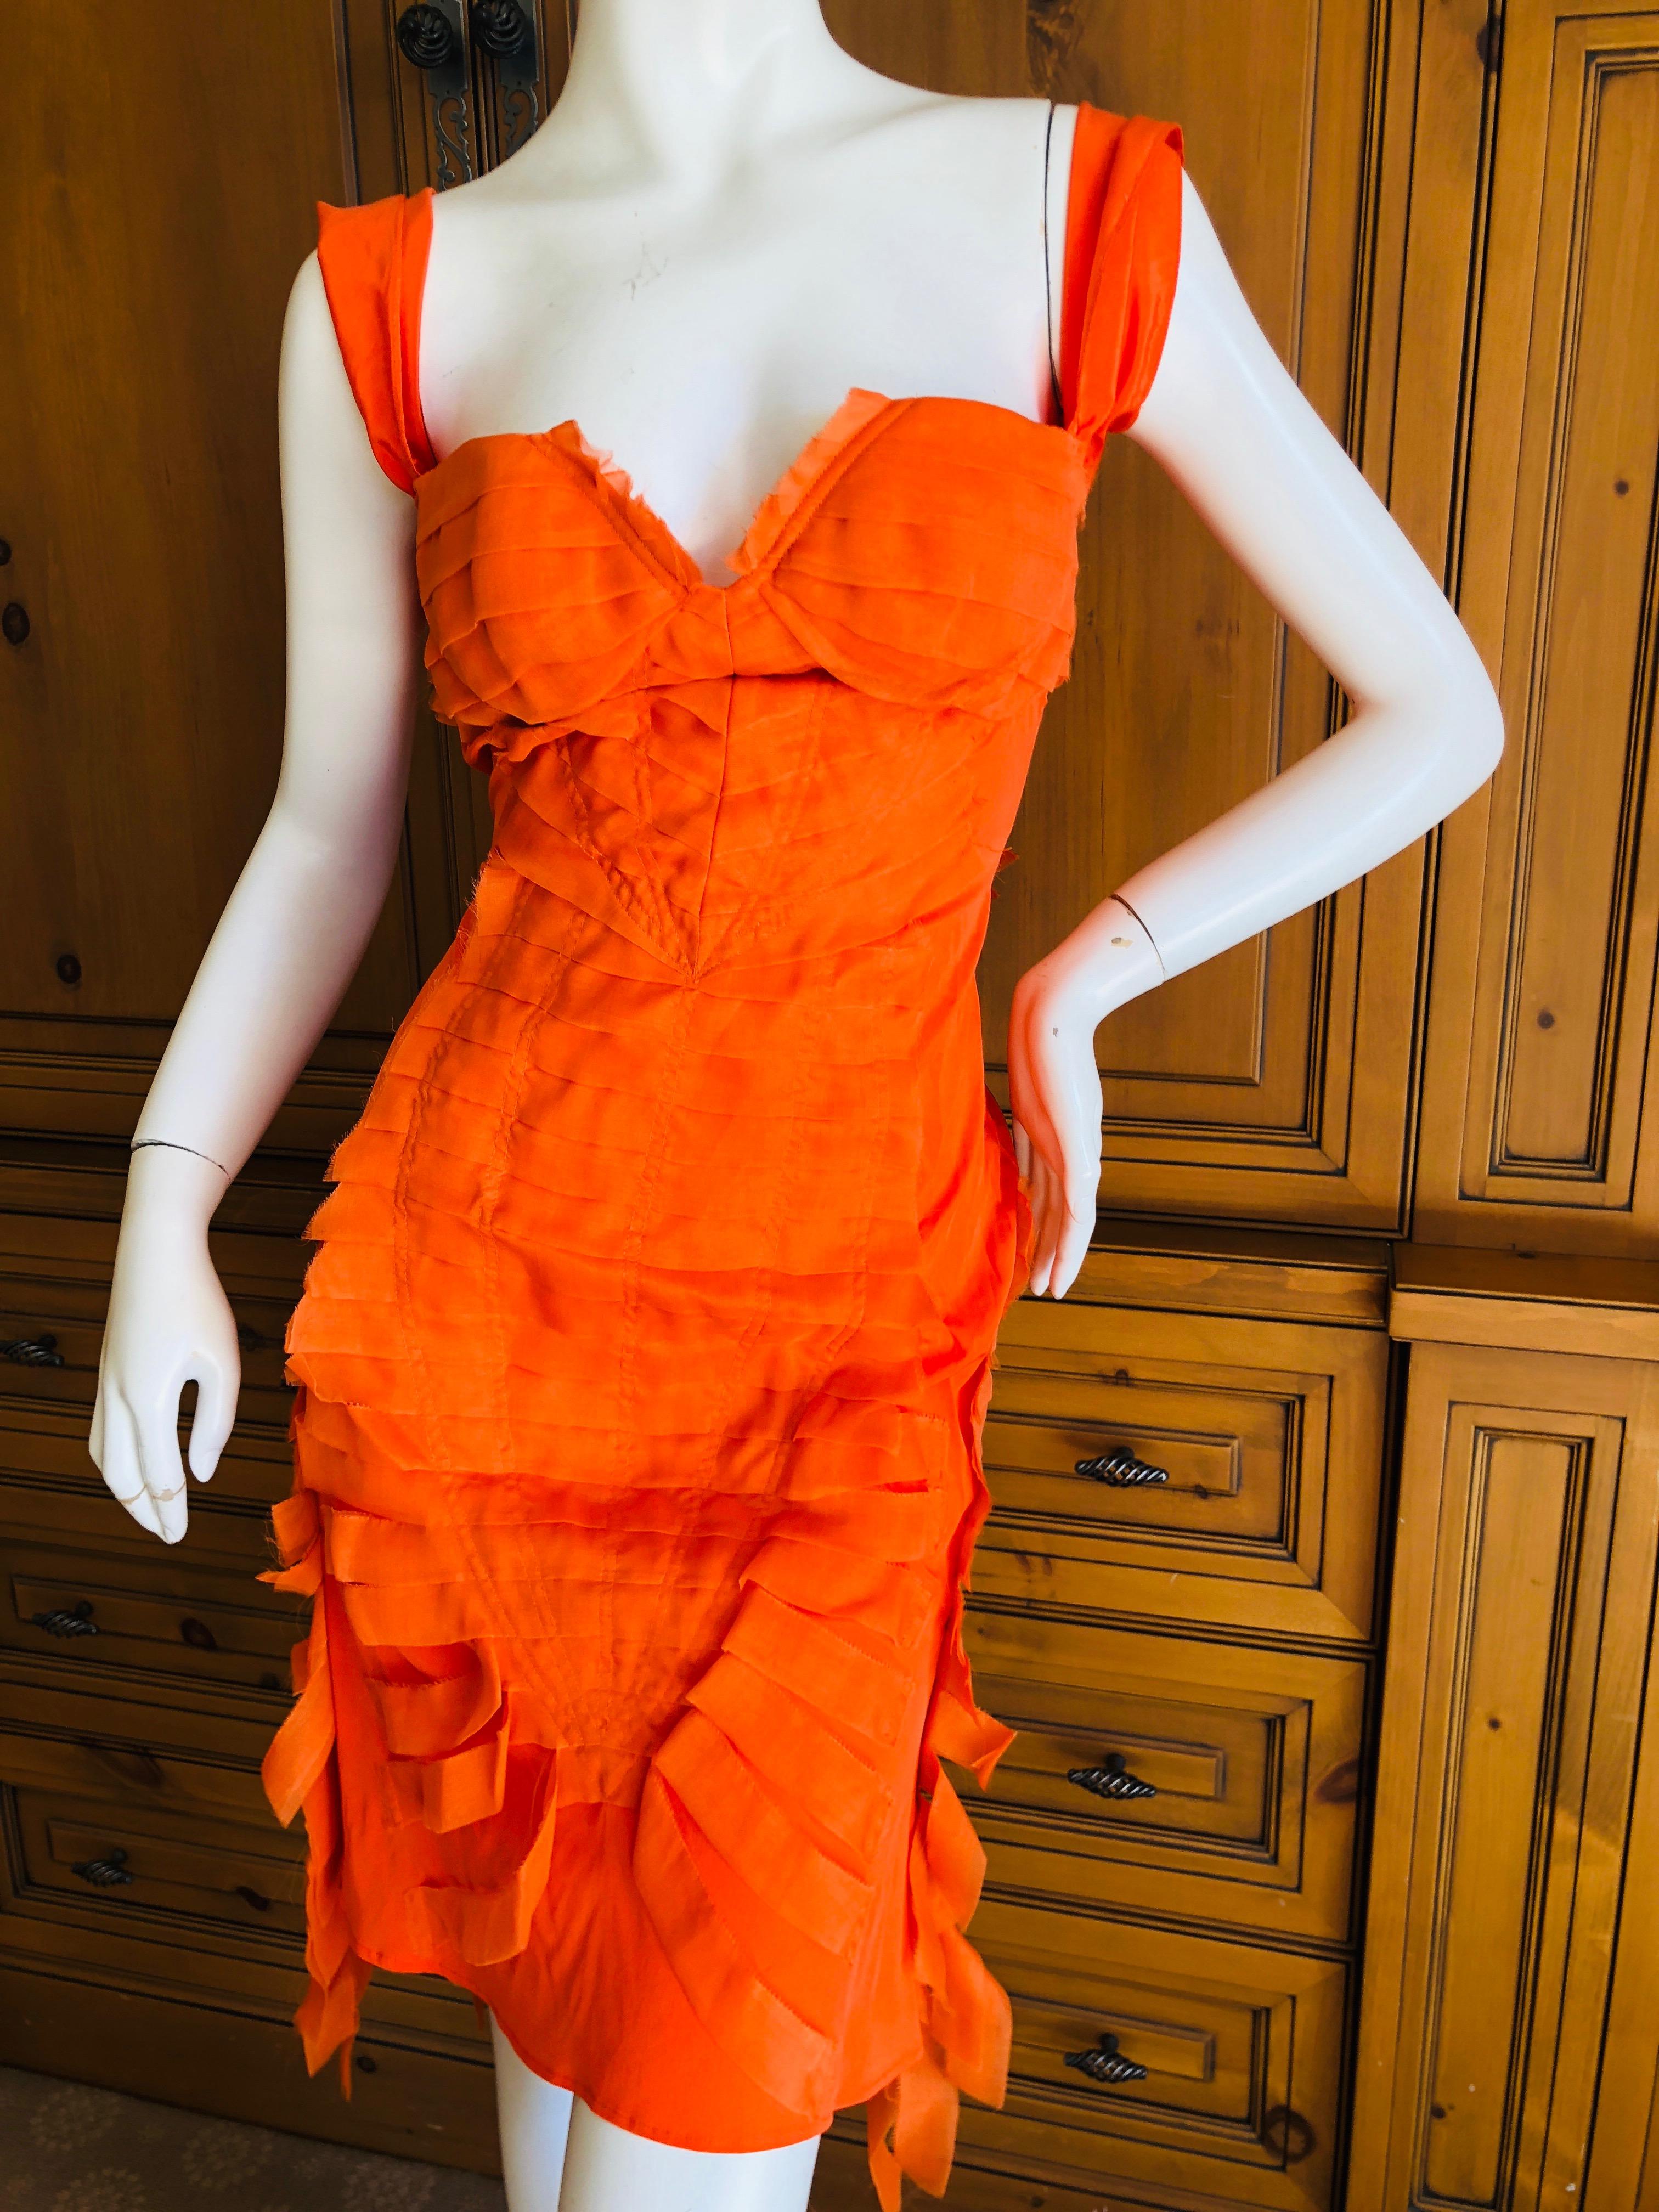 Gucci by Tom Ford 2004 Orange Ribbon Dress Tom Ford Book Piece New Tags For Sale 6